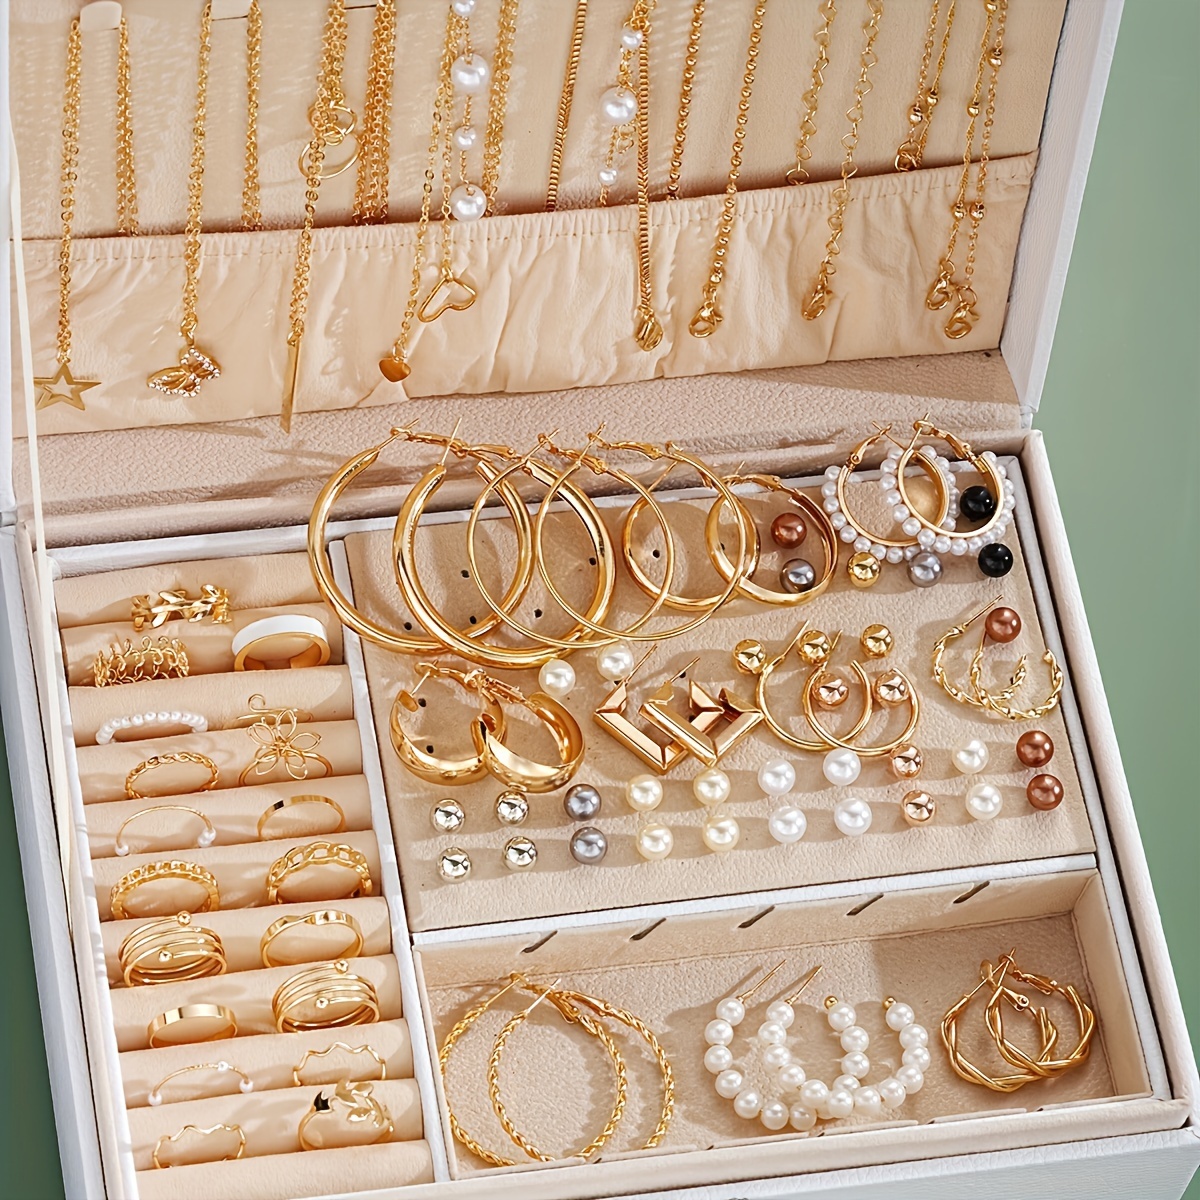 

56pcs Chic Jewelry Set, Including Necklaces, Earrings, Rings, Match Daily Outfits Party Accessories Casual Dating Decor (no Box)